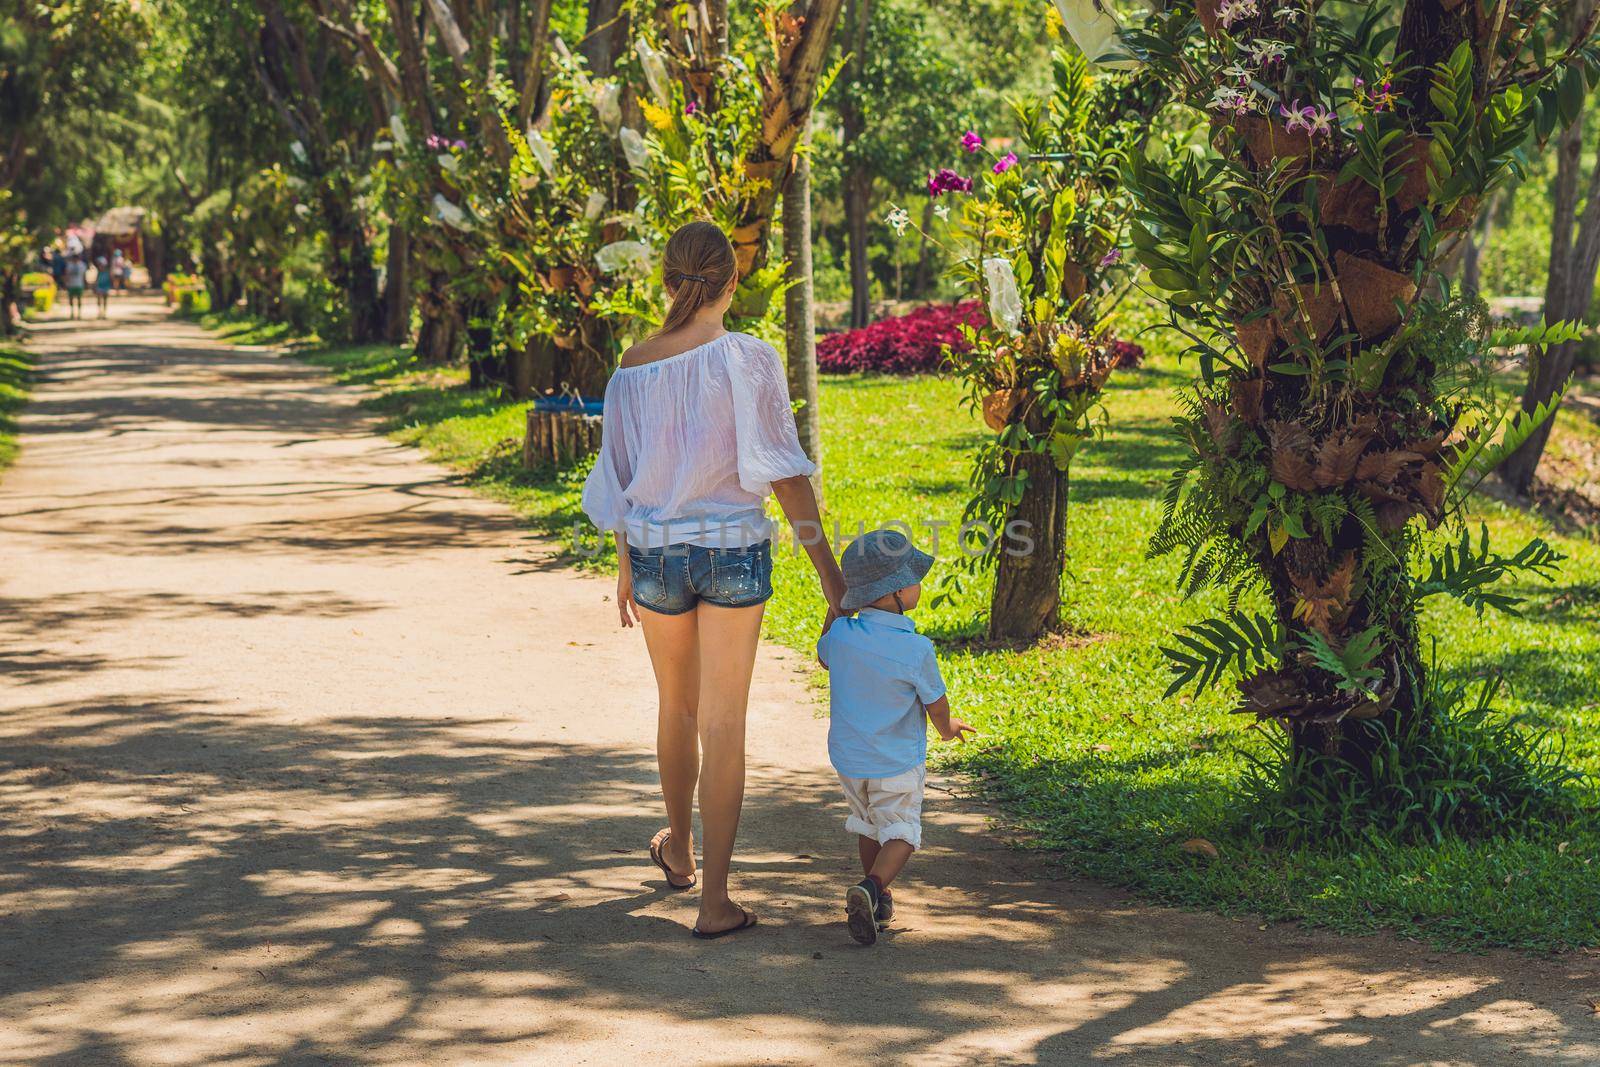 Mom and son are walking in the tropical park.